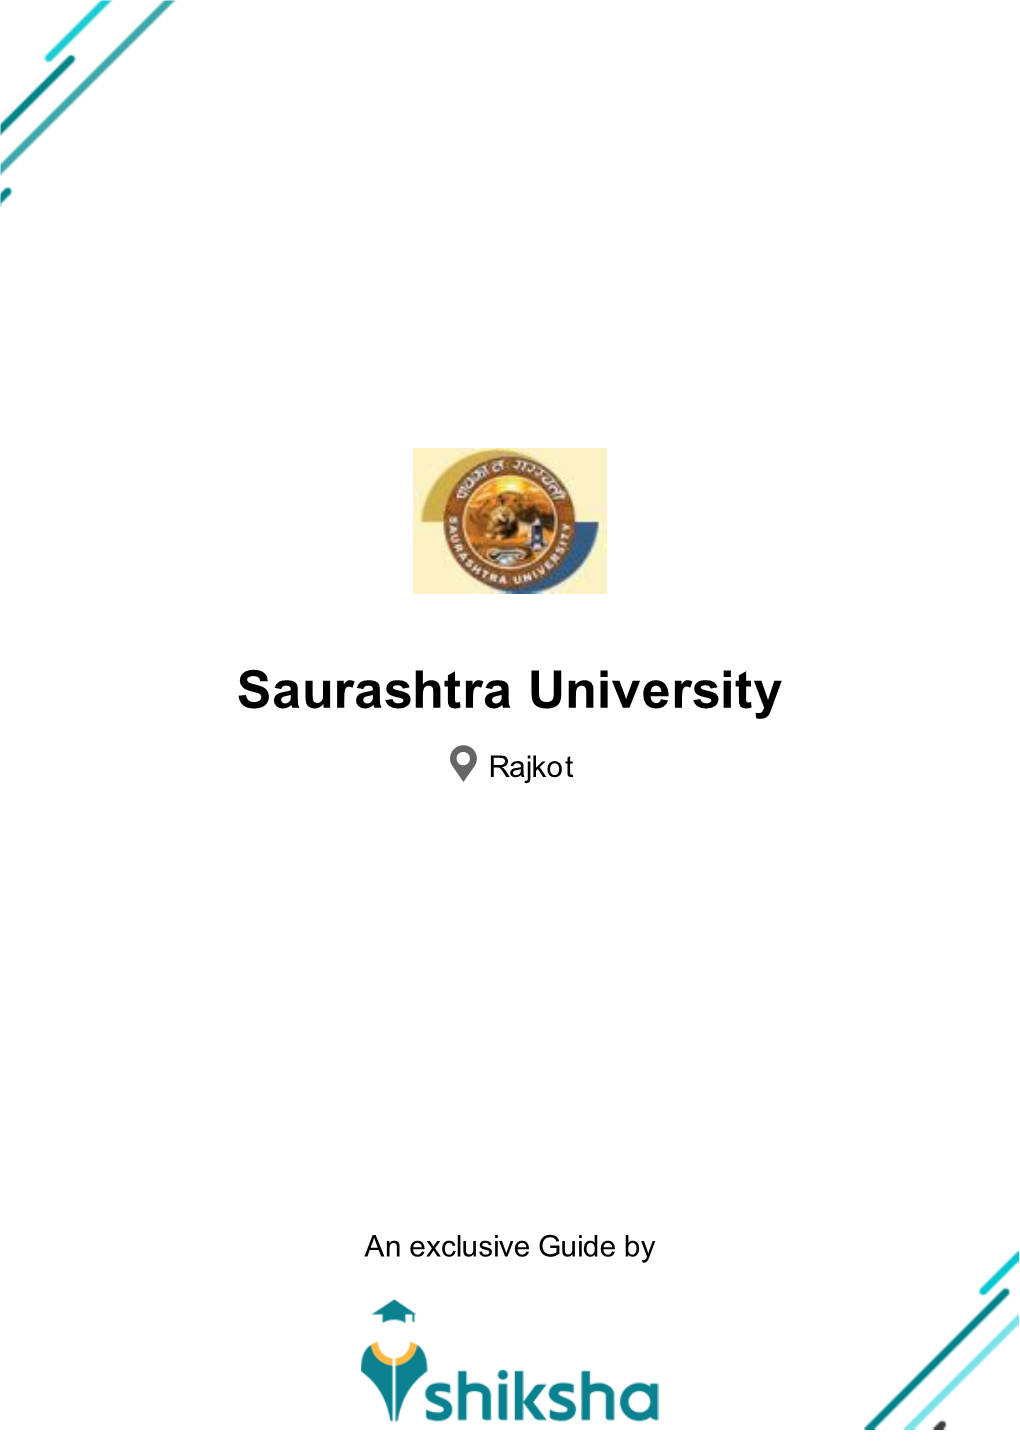 Saurashtra University Rajkot Answered Questions Get the Latest Answers on Cutoff, Courses, Placements, Admission, Fees, Ranking & Eligibility